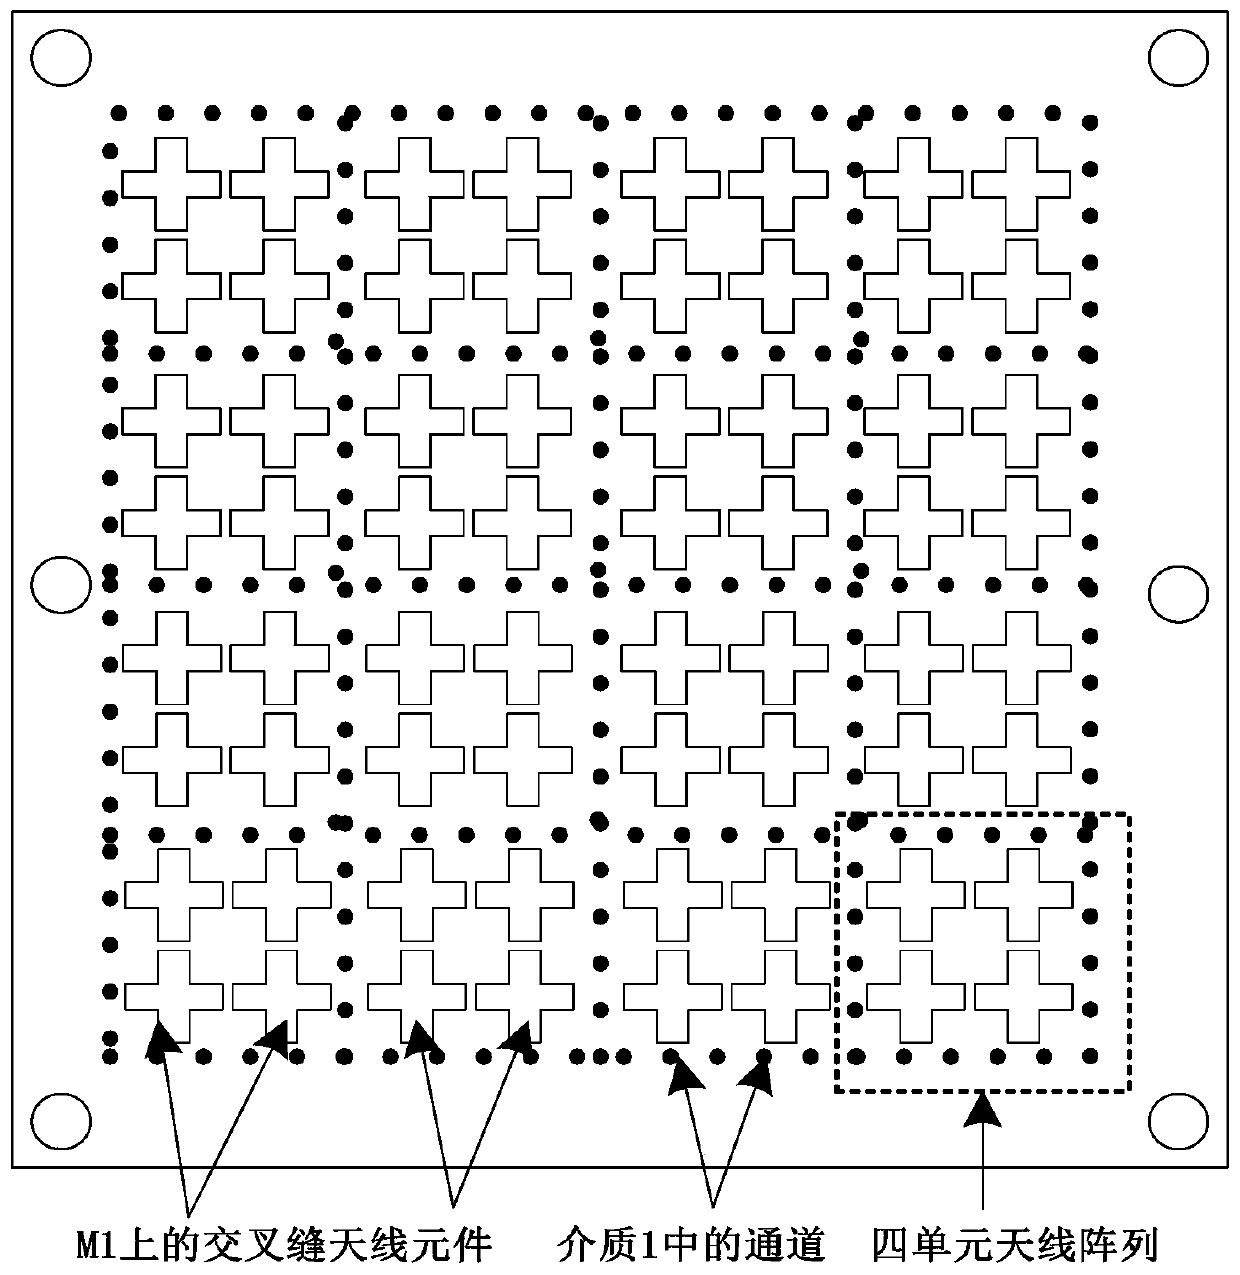 Millimeter wave antenna array with characteristic of diversified oblique transmission angles